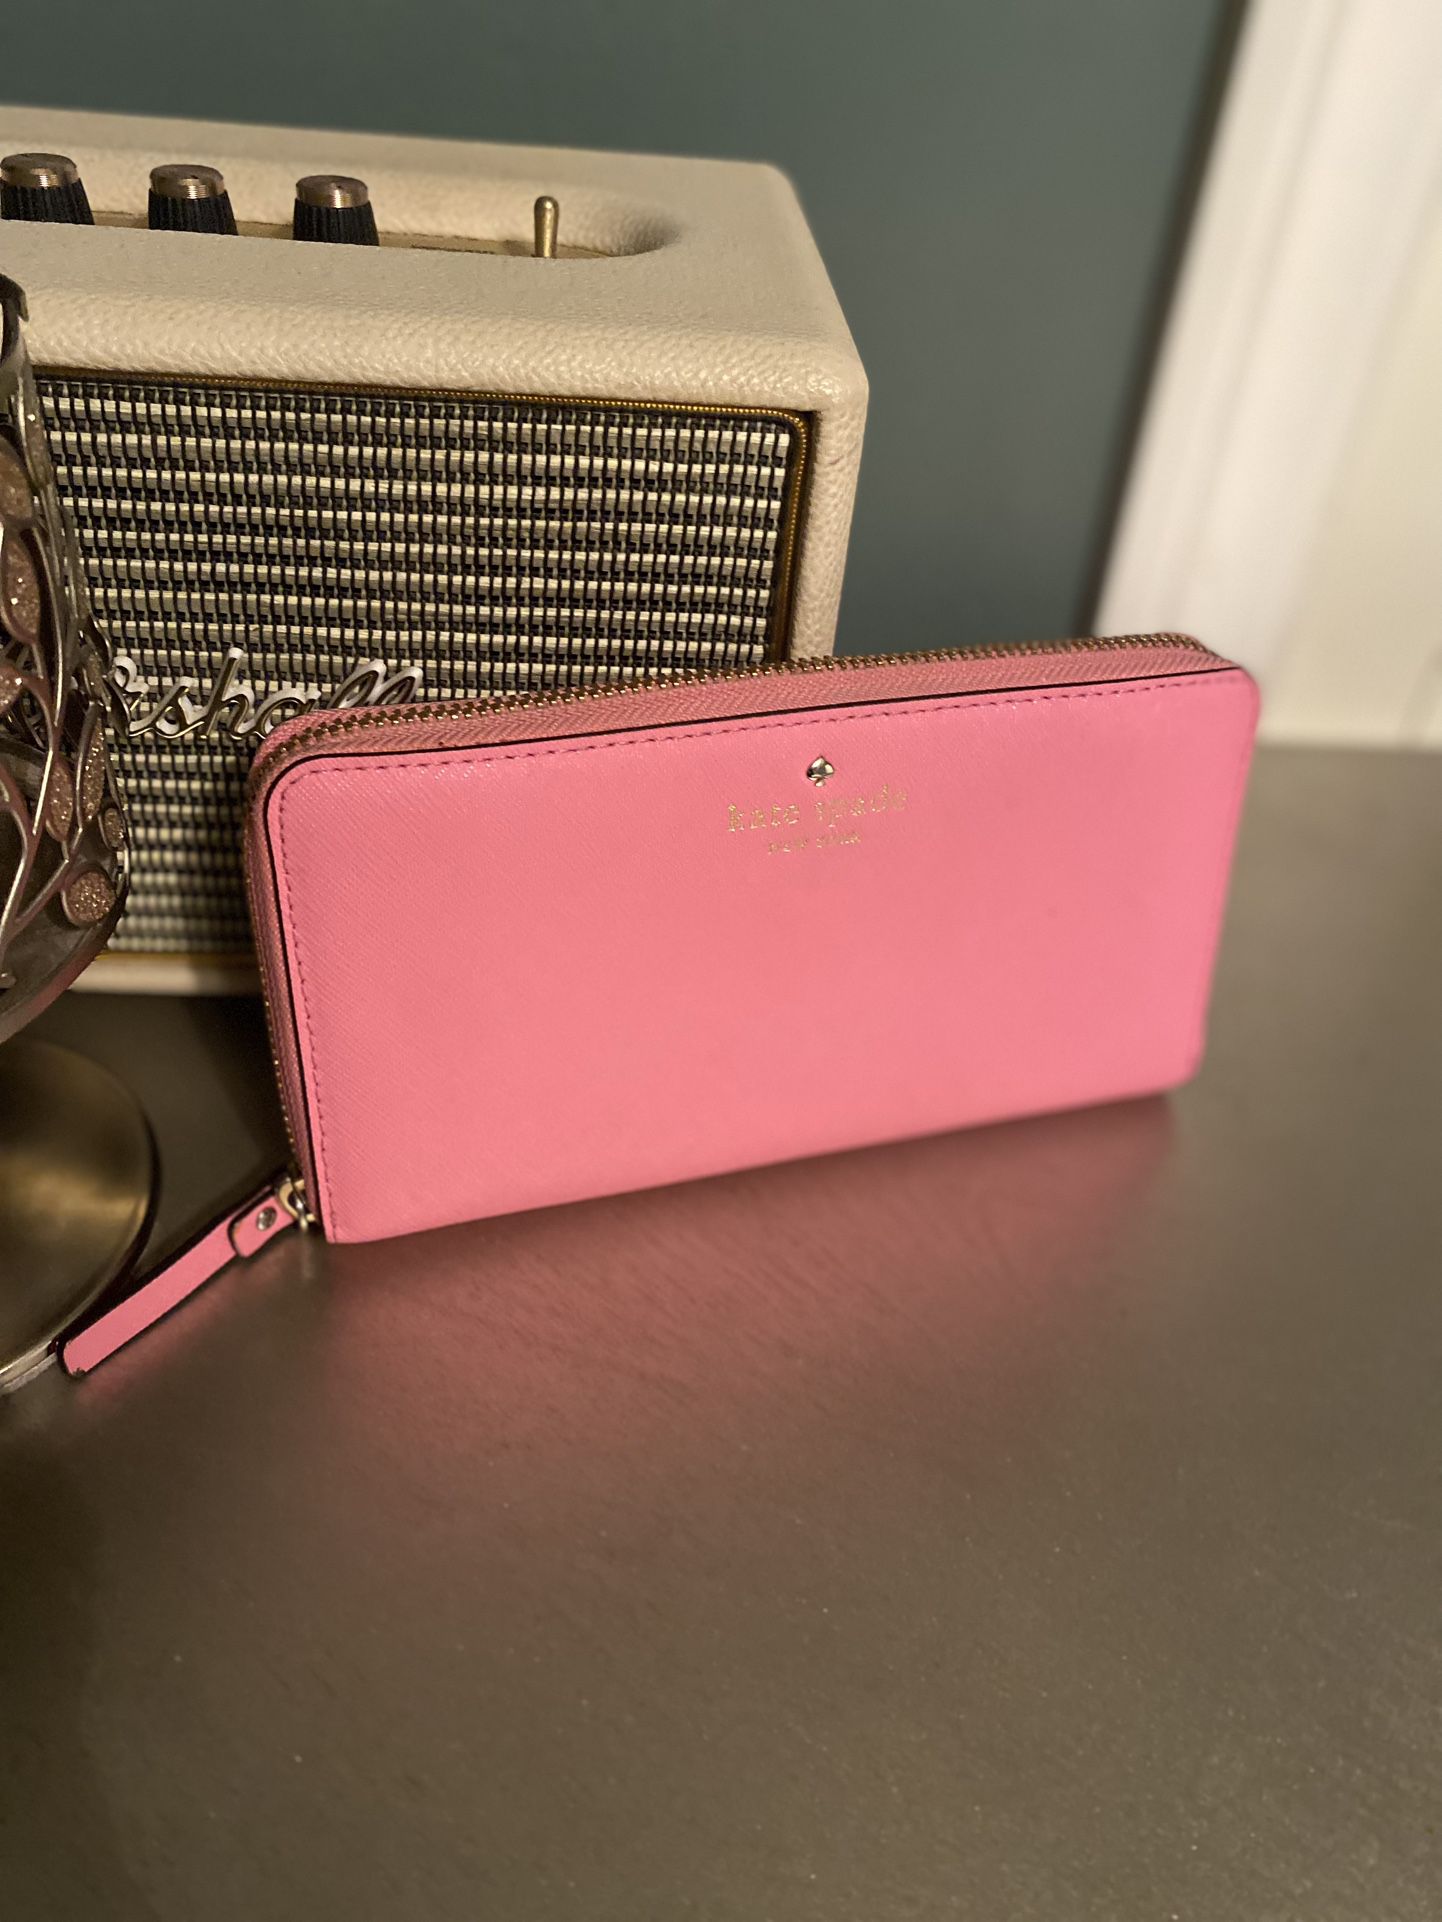 SALE!! Clearing Out closet-Kate Spade NY Wallet